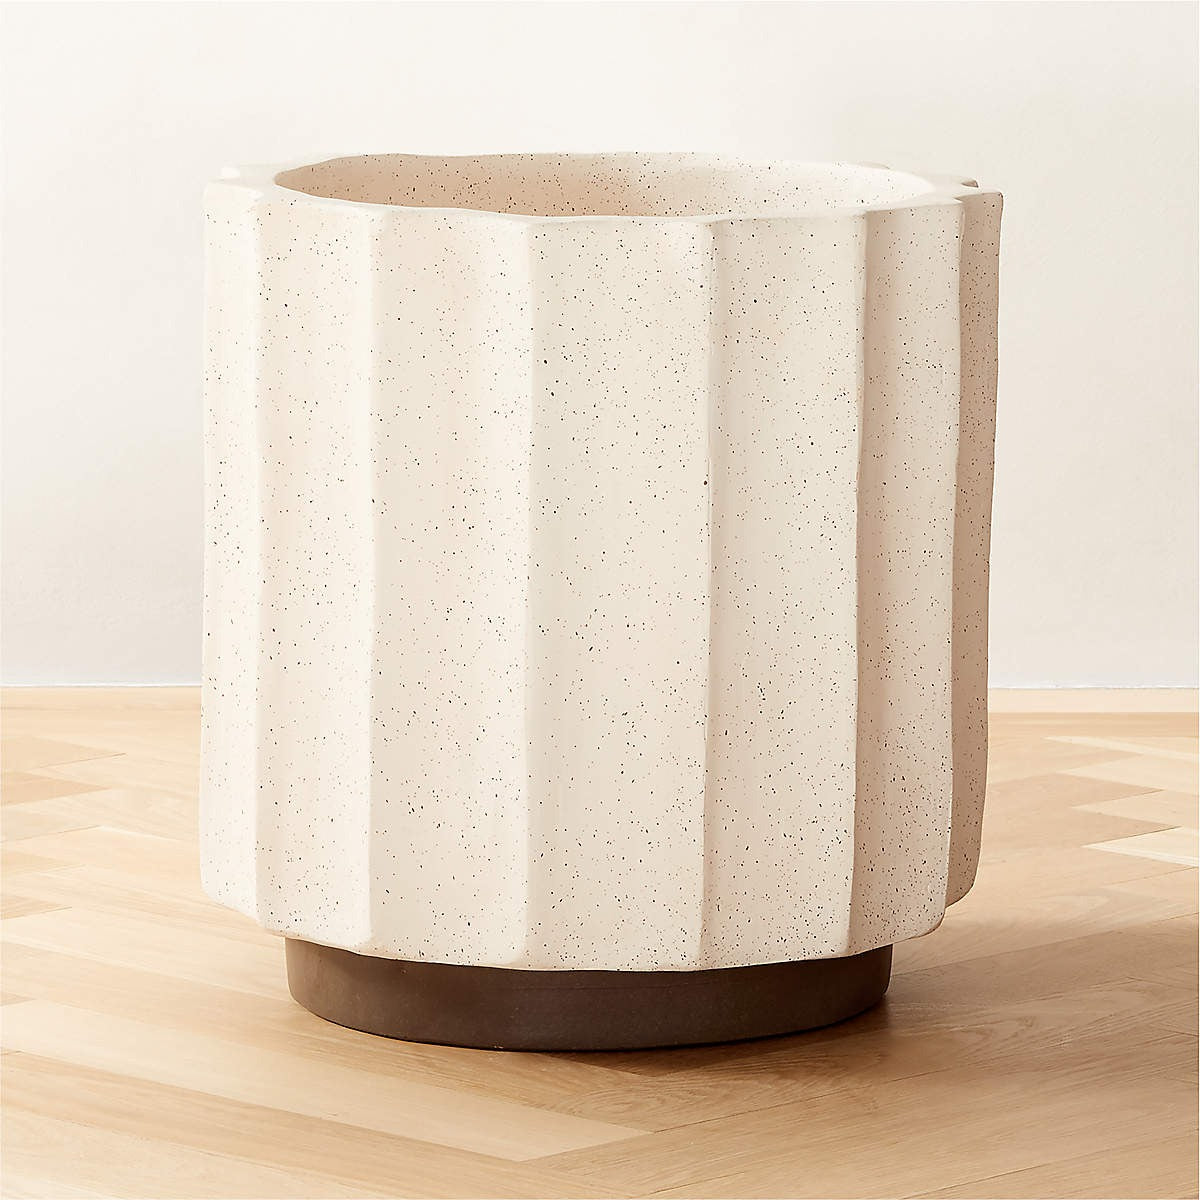 SCALLOP WHITE CLAY INDOOR/OUTDOOR PLANTERS